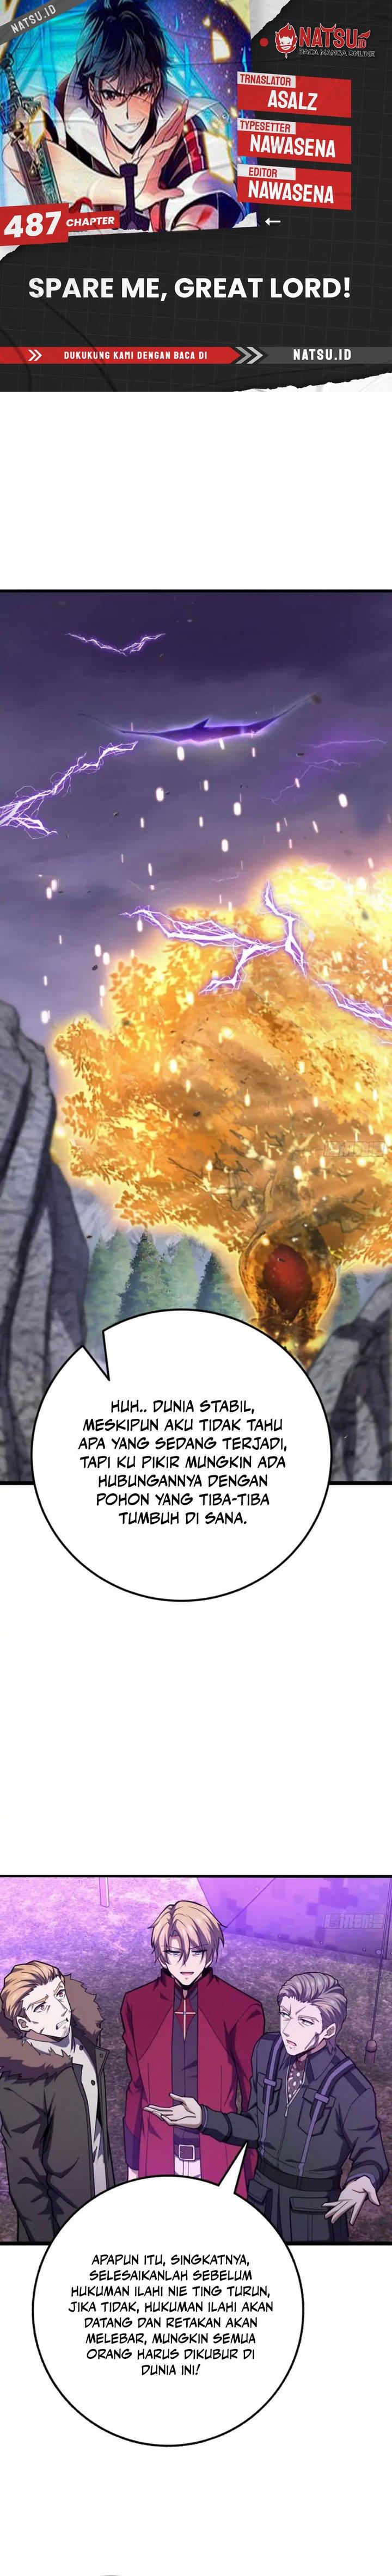 Spare Me, Great Lord! Chapter 487